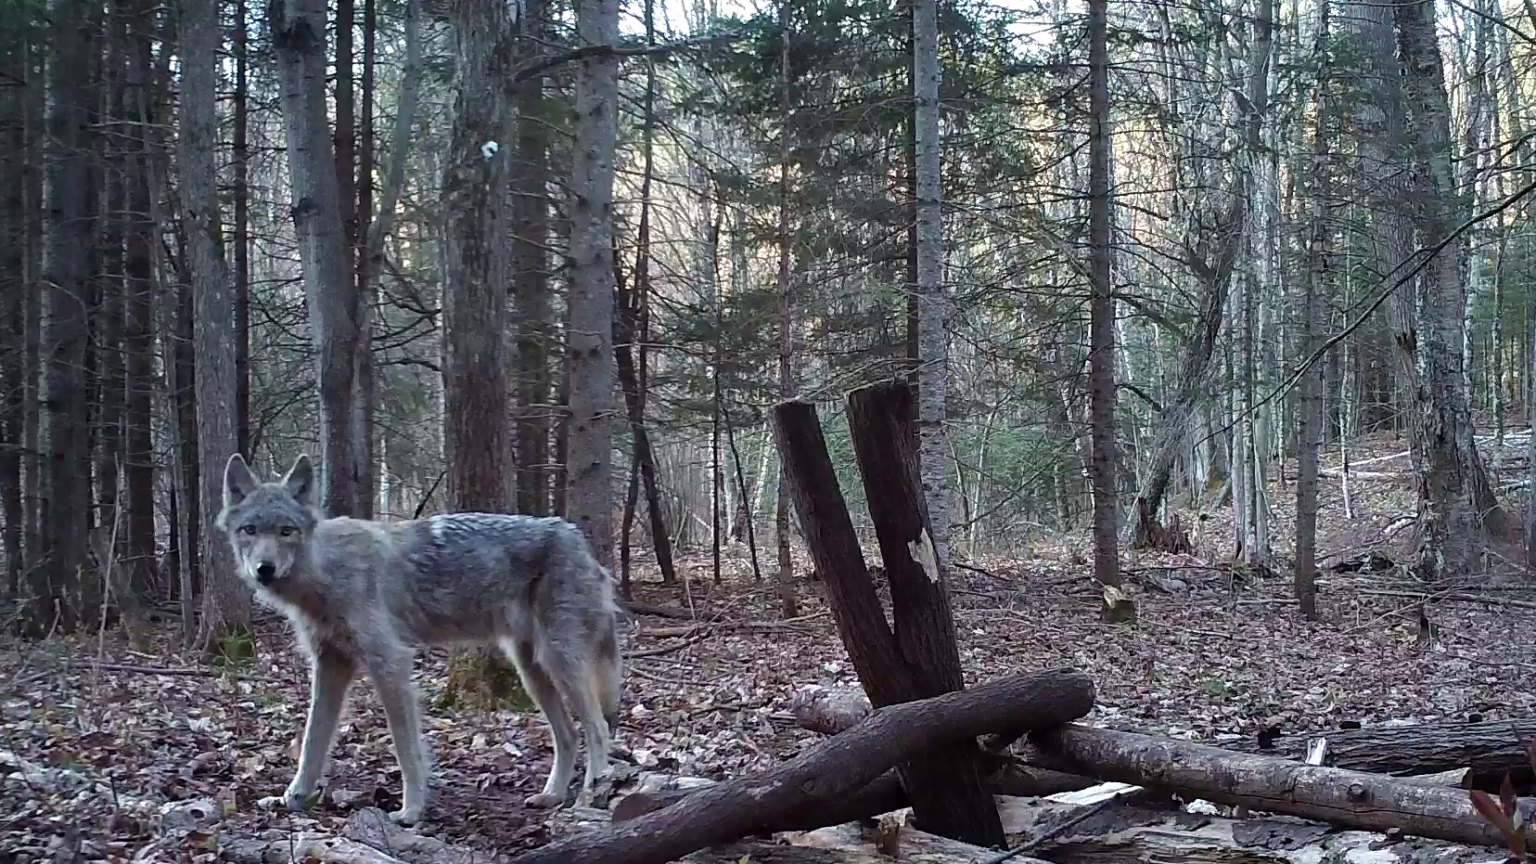 Wolf in profile from still of trail cam